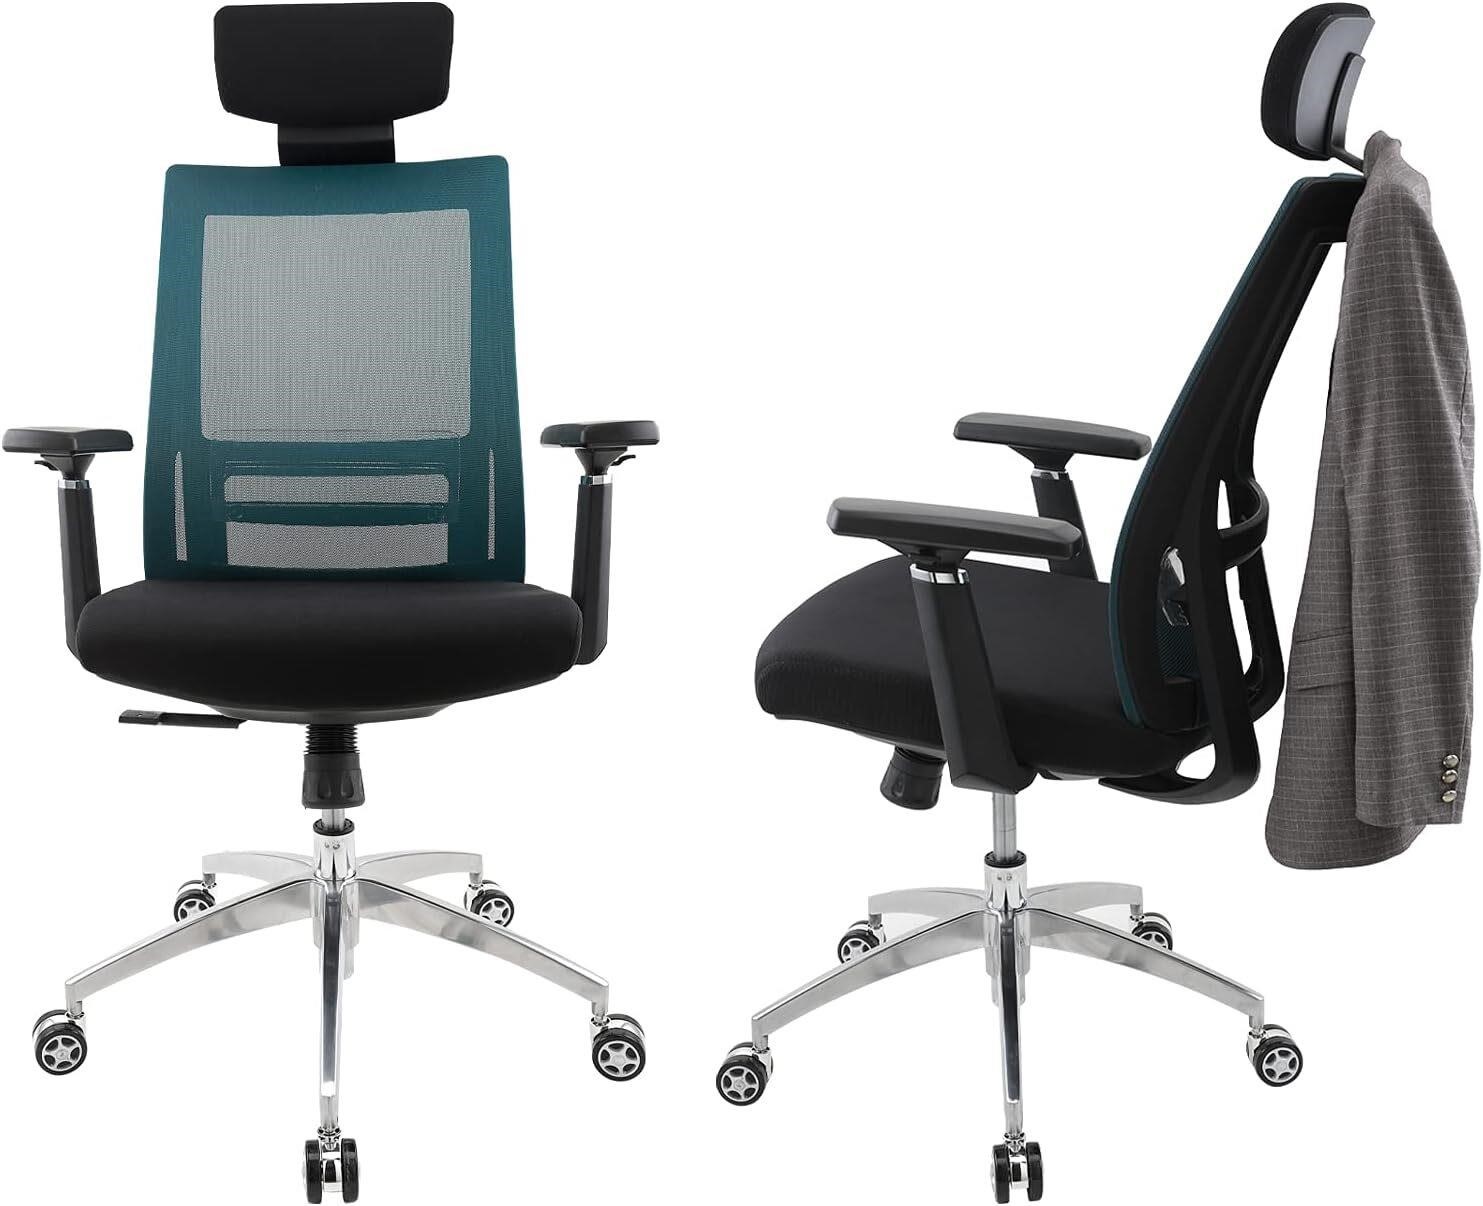 ACEGIKMOQ Ergonomic Office Chair Mesh with Clothes